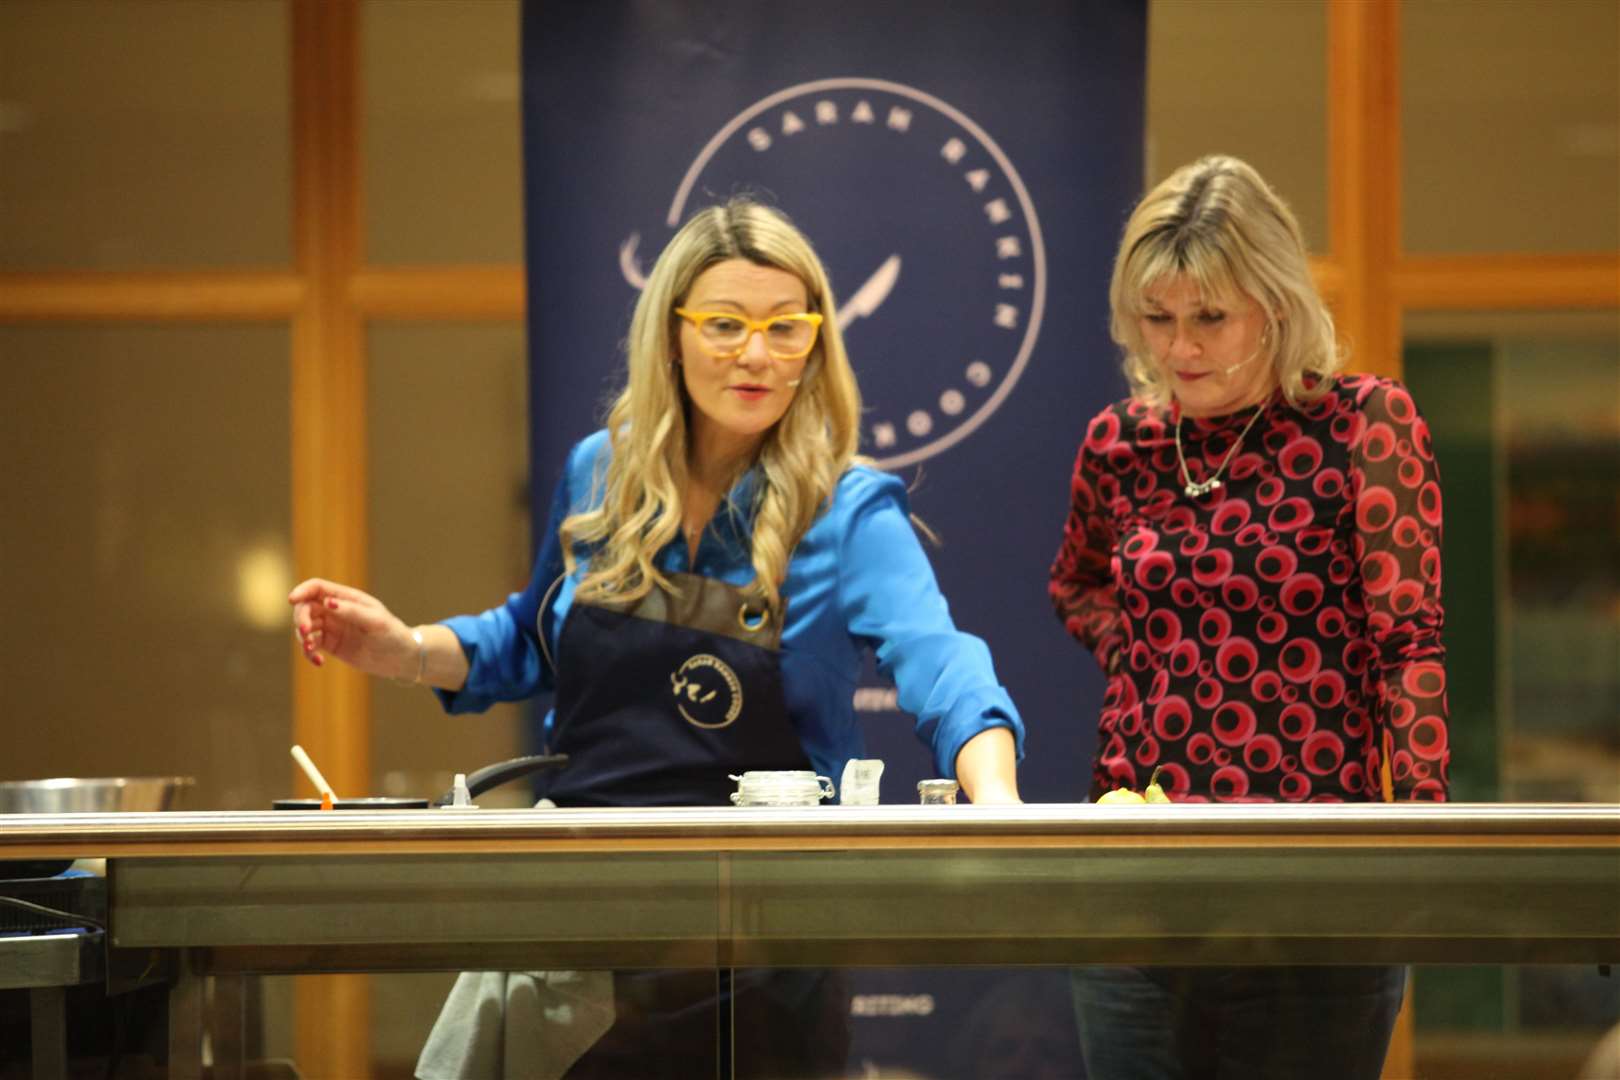 Sarah Rankin did a live cooking demonstration while Nicky Marr hosted the event.